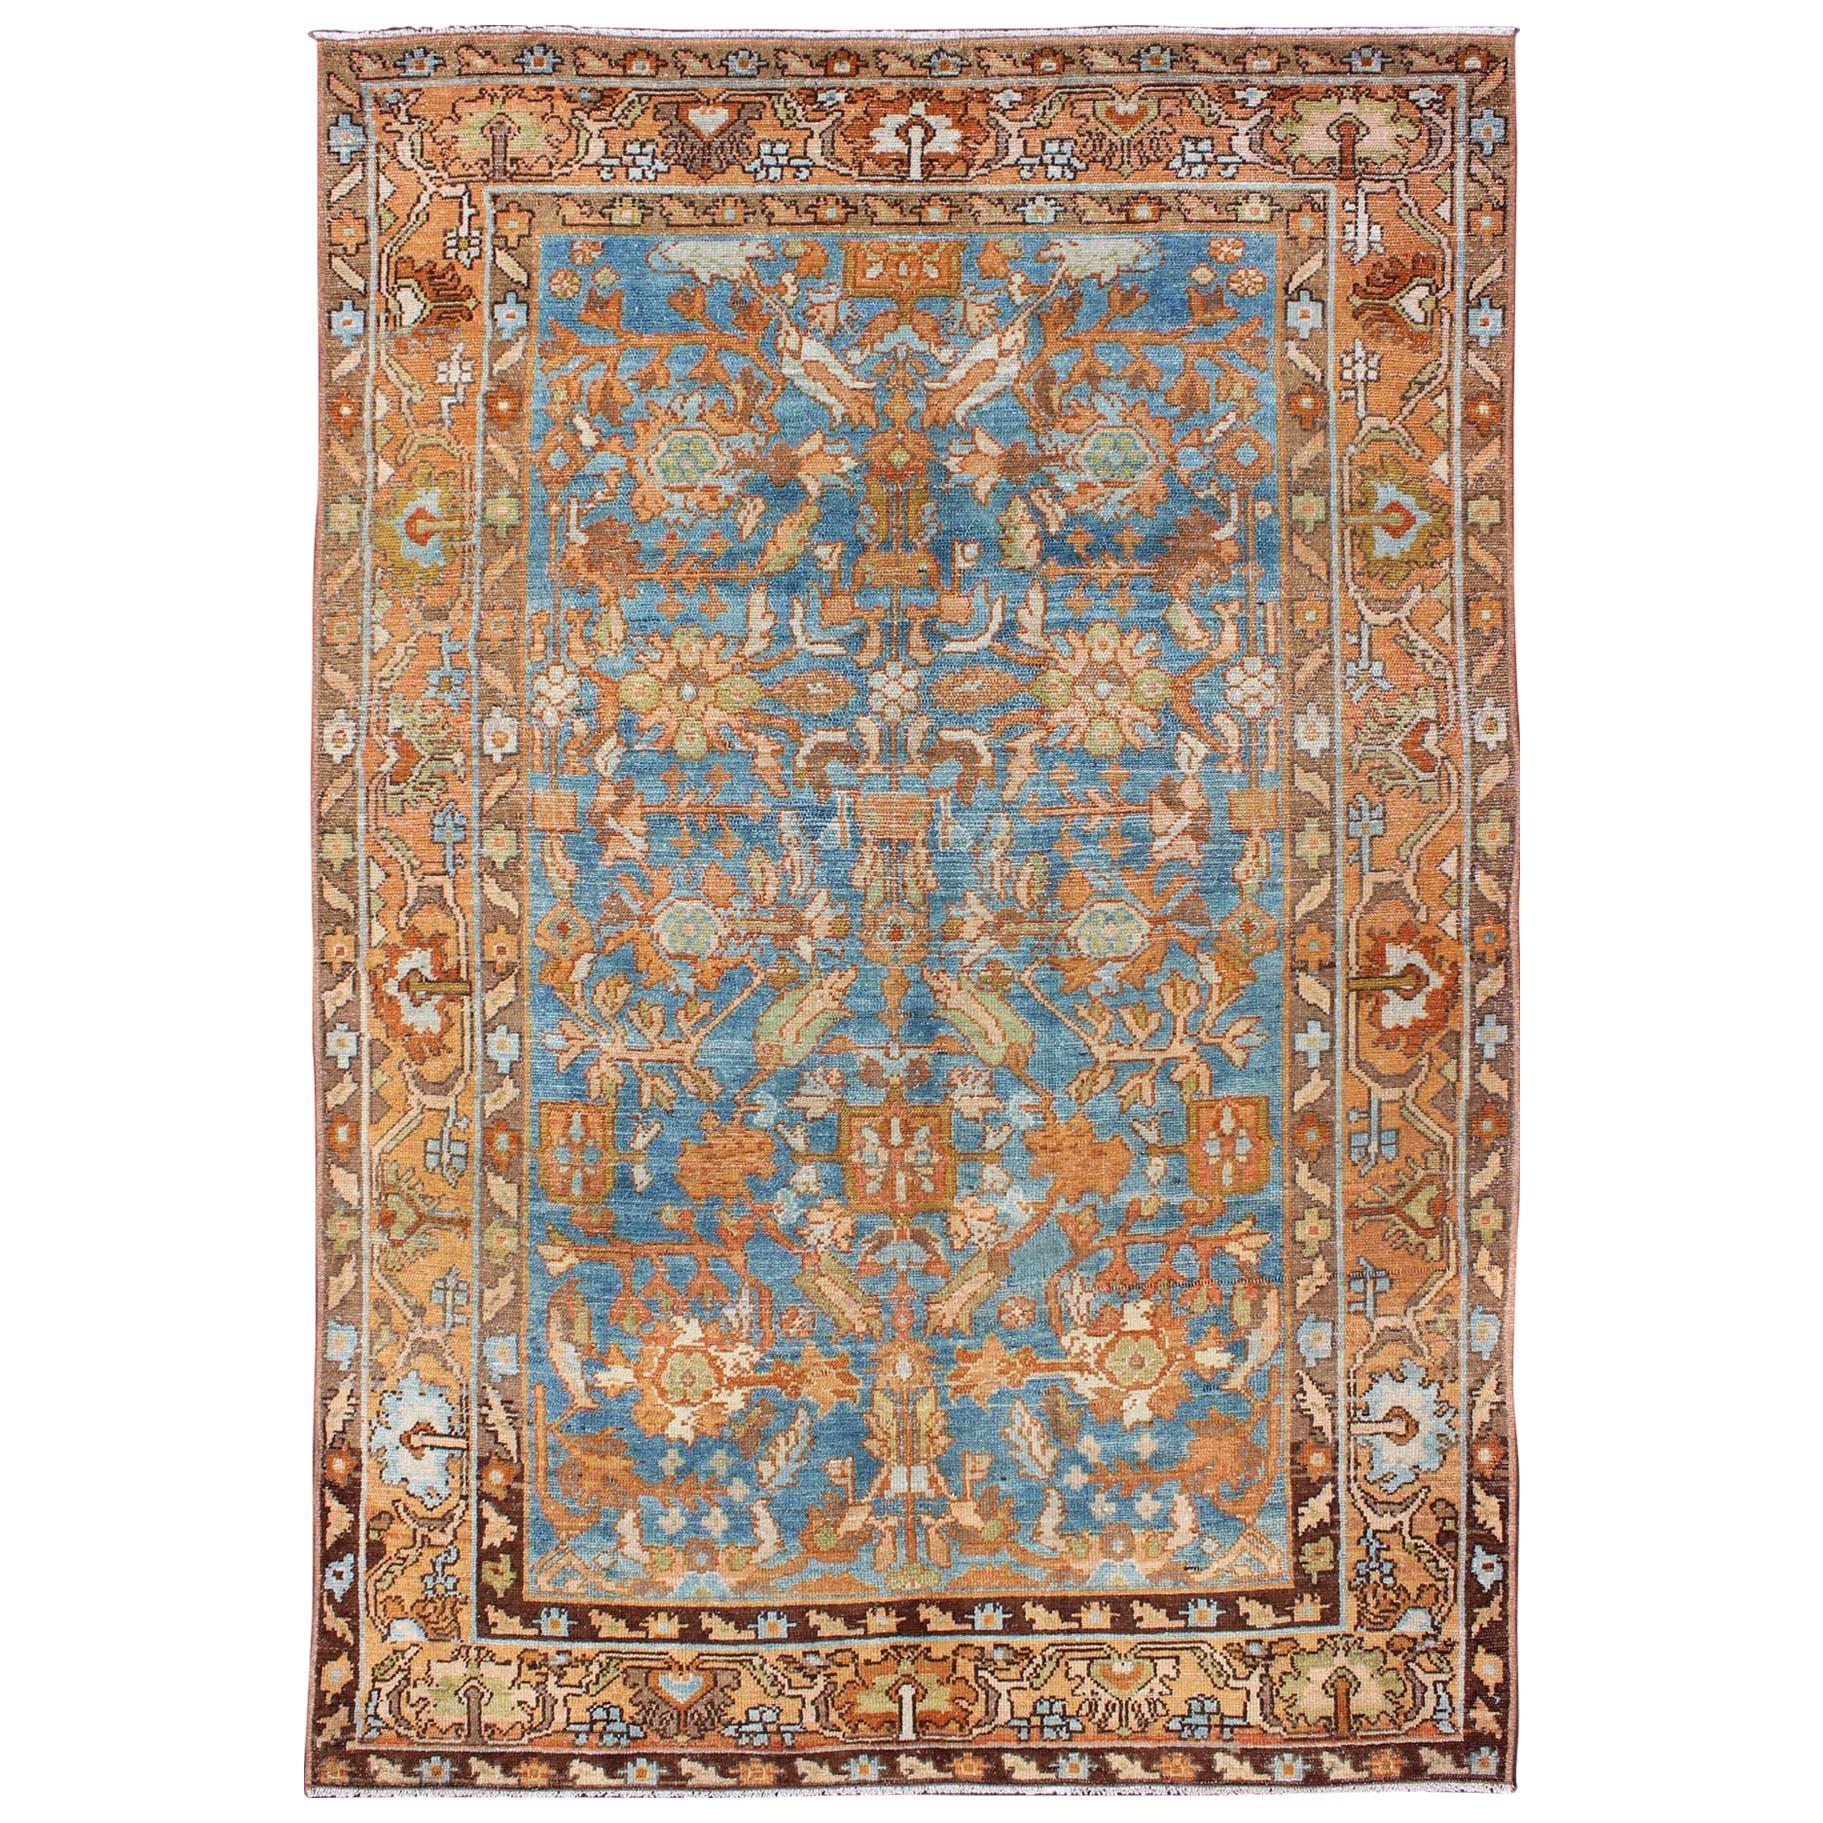 Vibrant Antique Persian Malayer Rug in Shades of Rust, Orange, and Blue For Sale